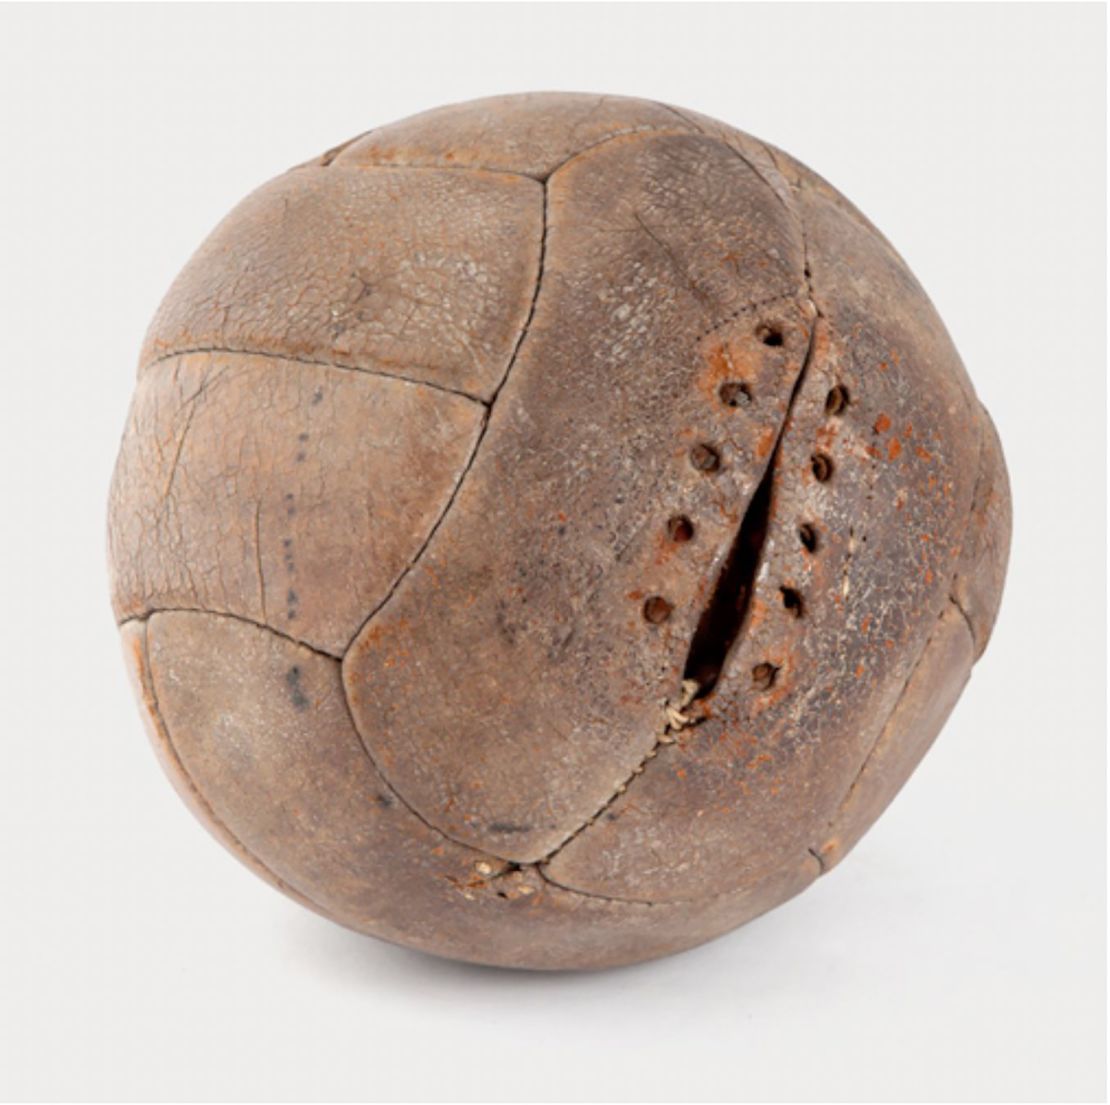 One of the two match balls used in the 1930 World Cup final, supplied by Argentina and used in the first half.